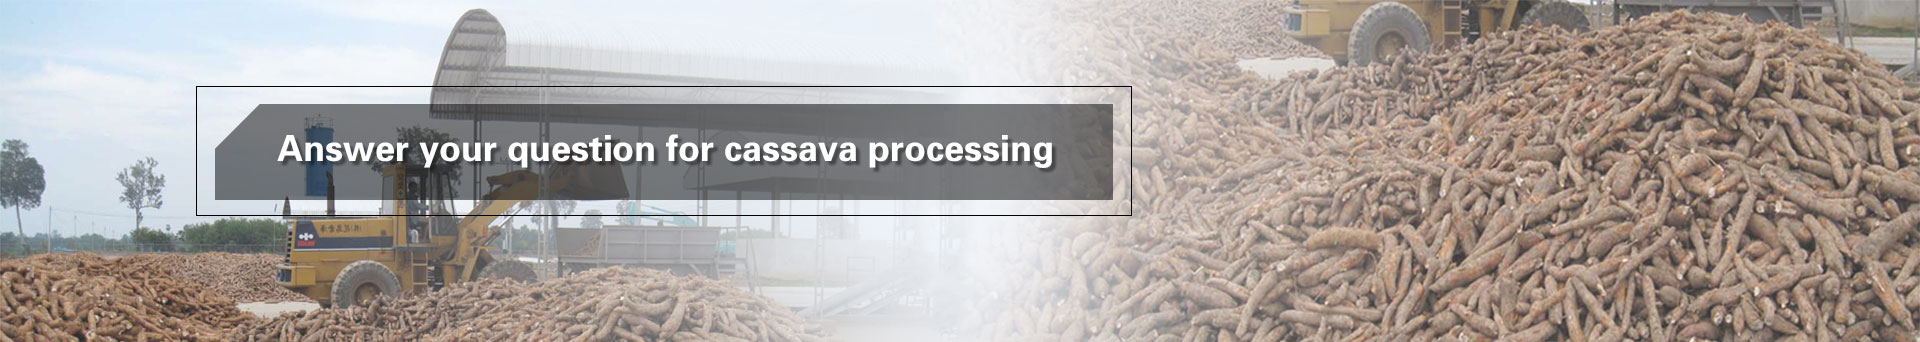 cassava production and processing